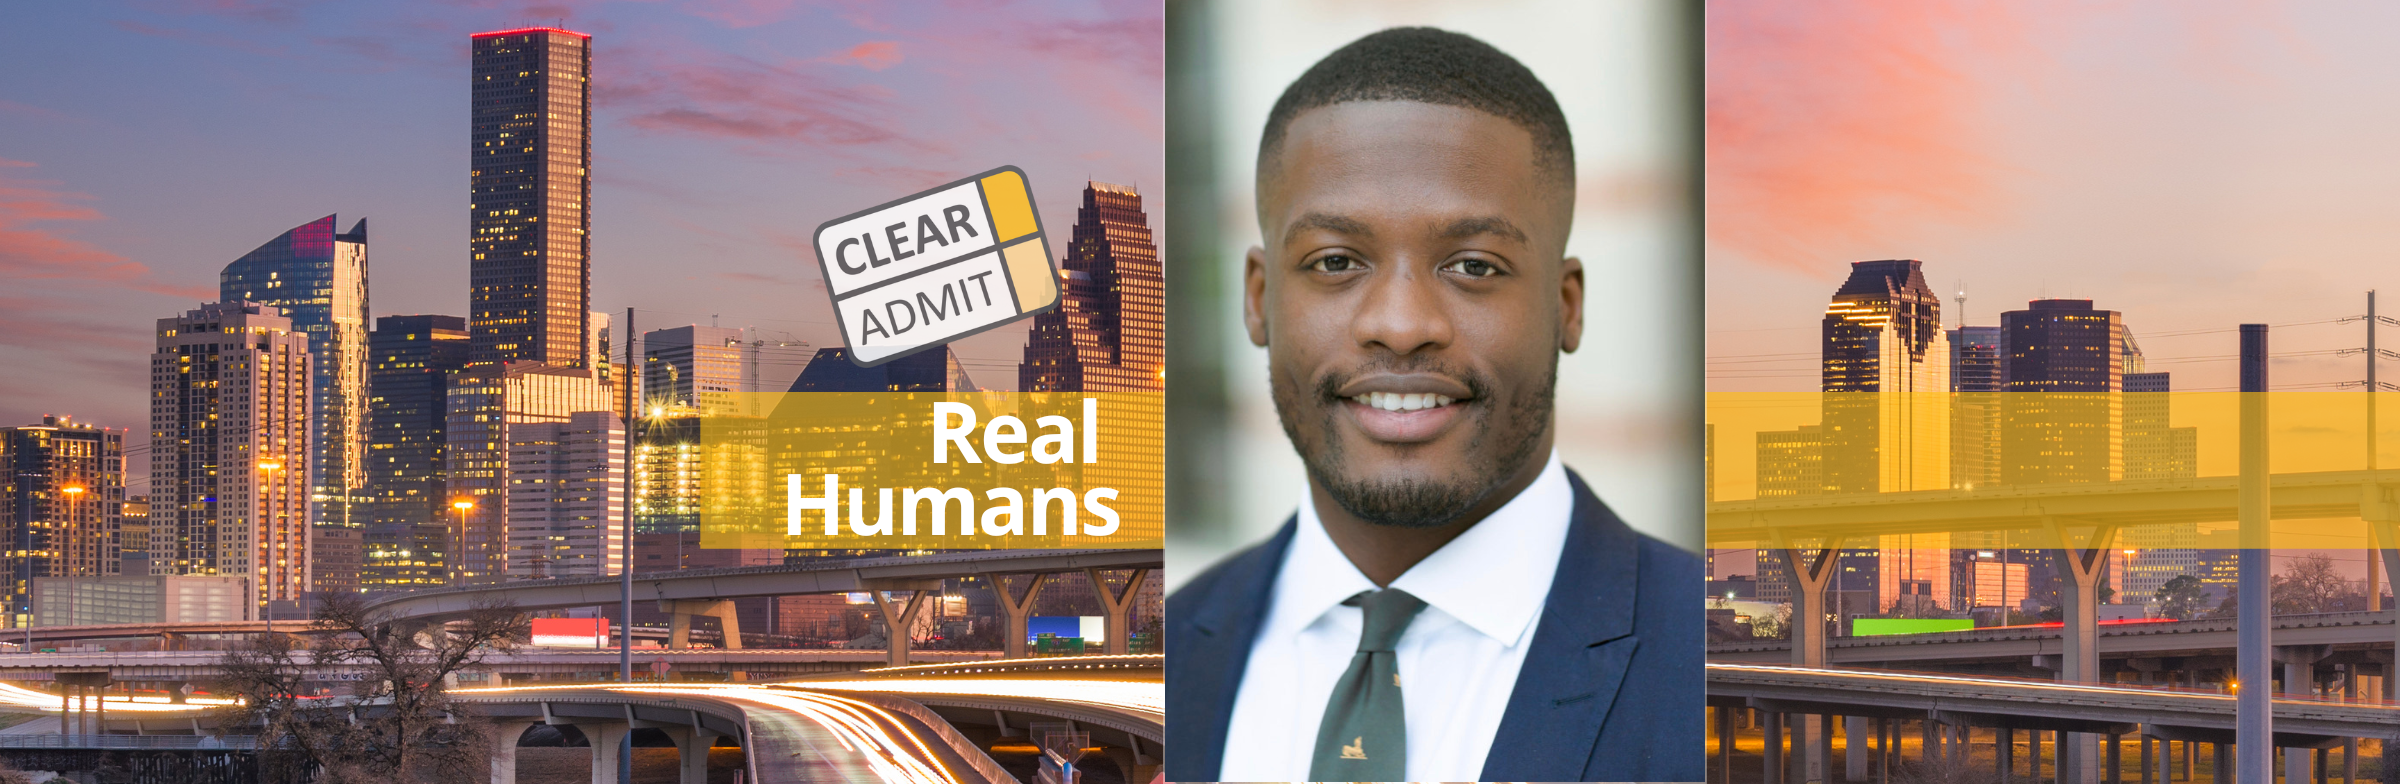 Image for Real Humans of Goldman Sachs: Jordan Aré, Rice Business MBA ’22, Investment Banking Associate